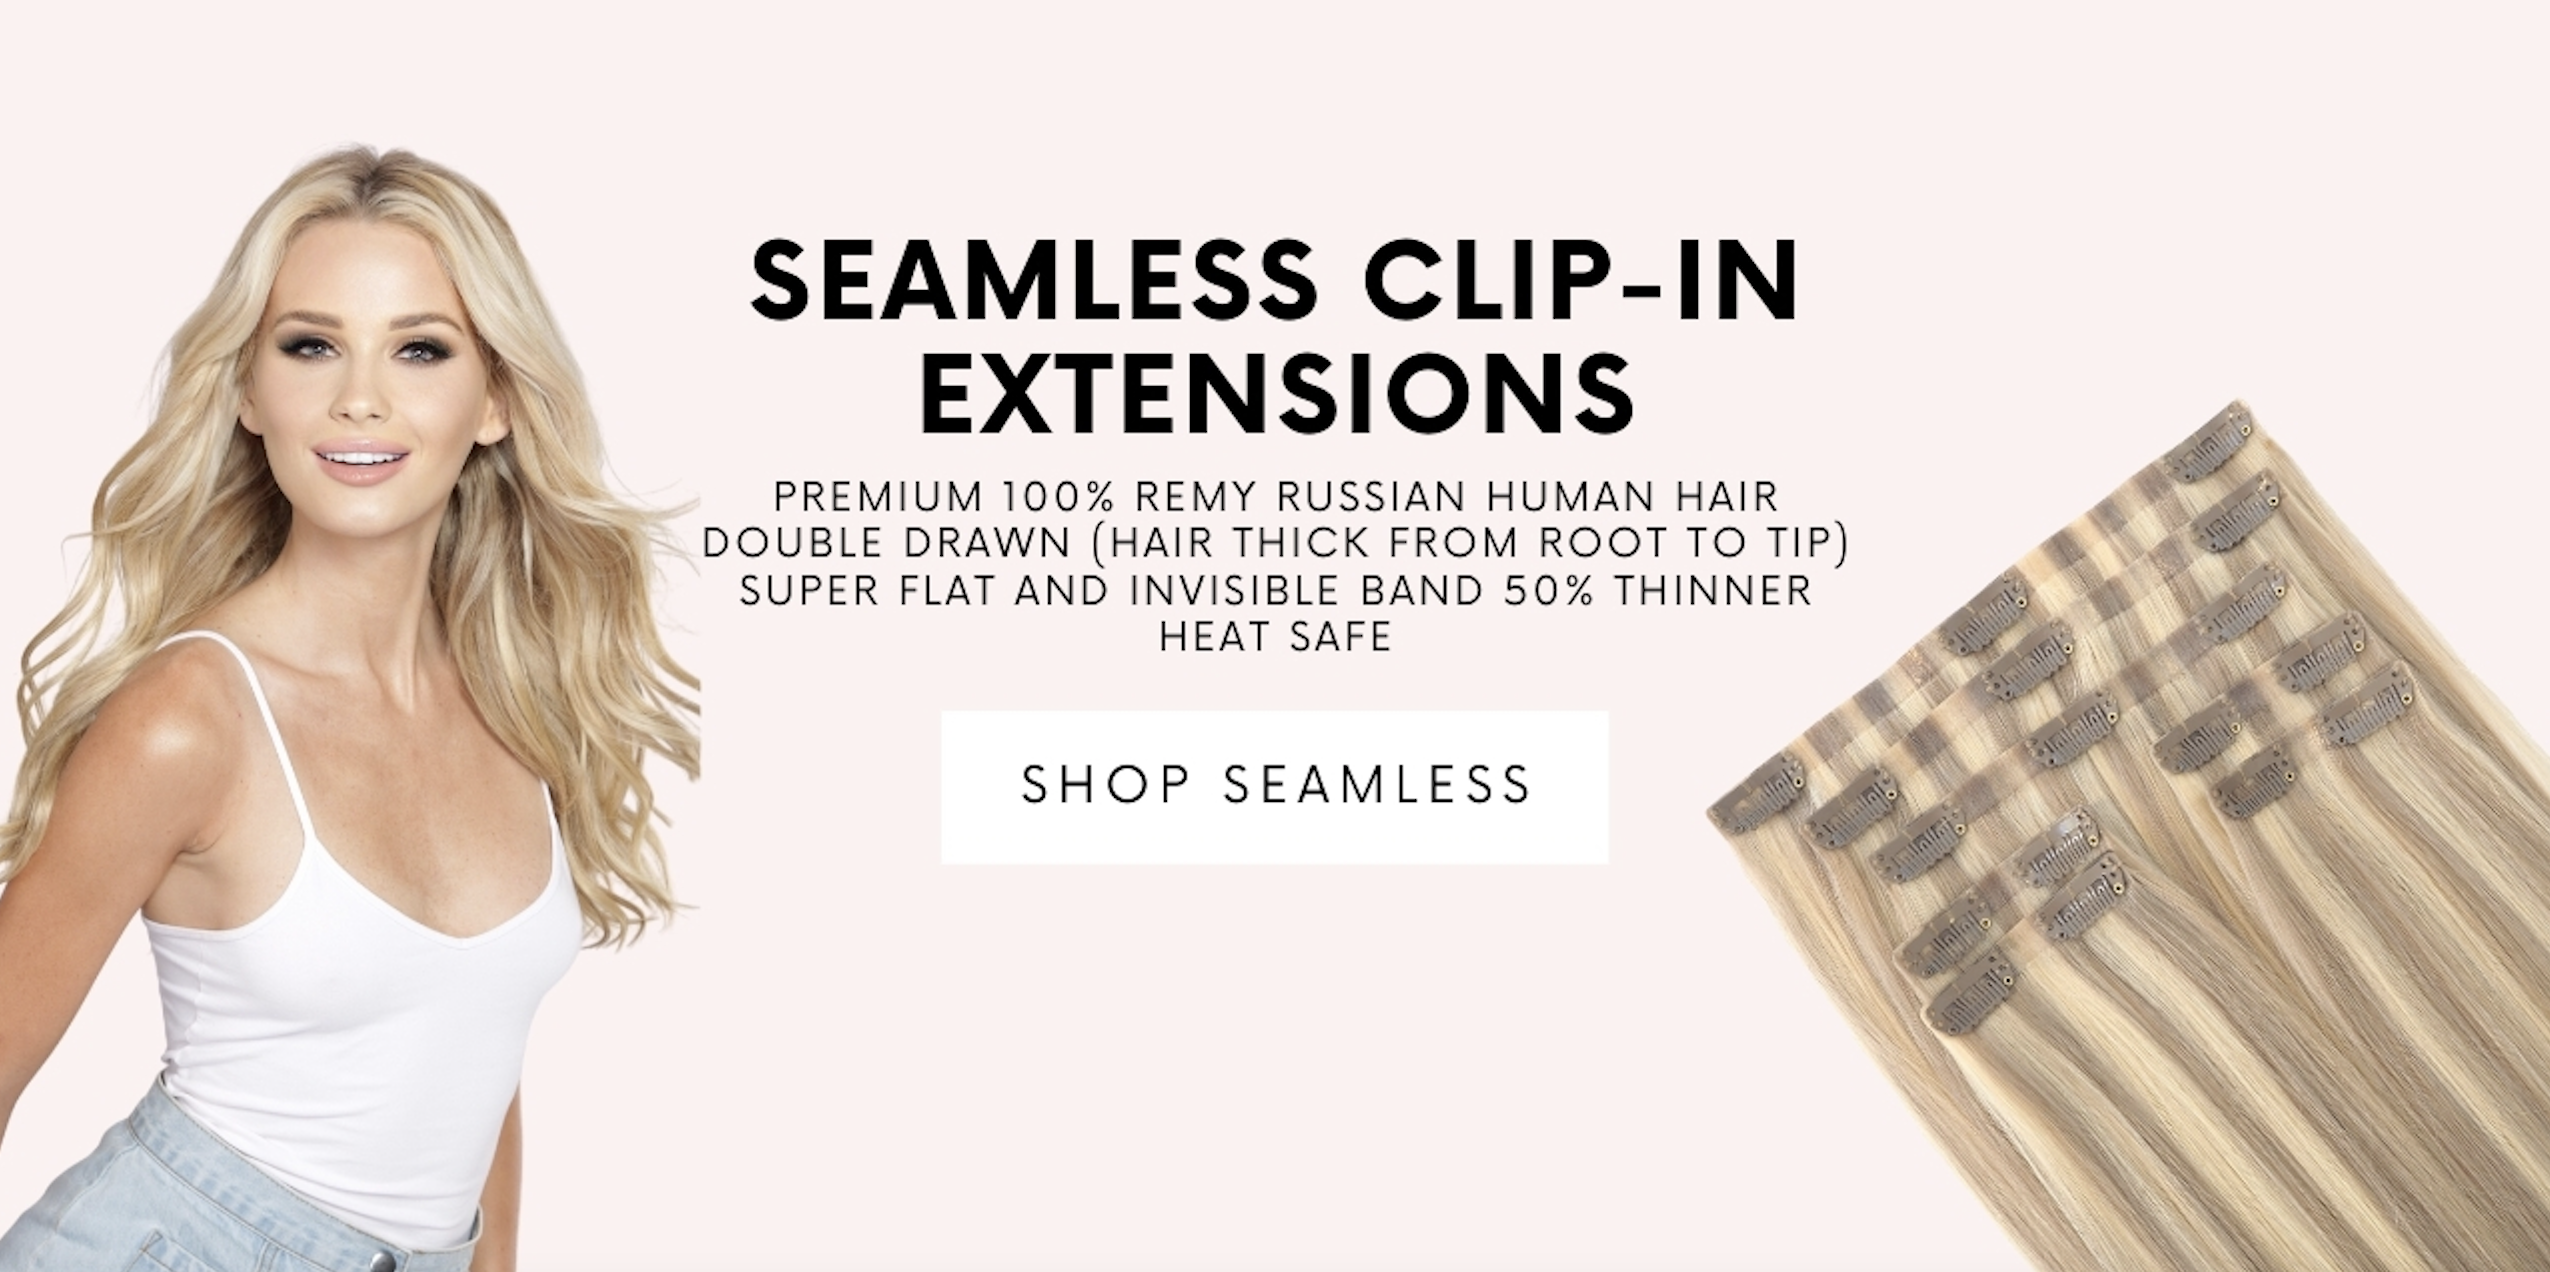 Cashmere Hair Seamless Clip In Extensions